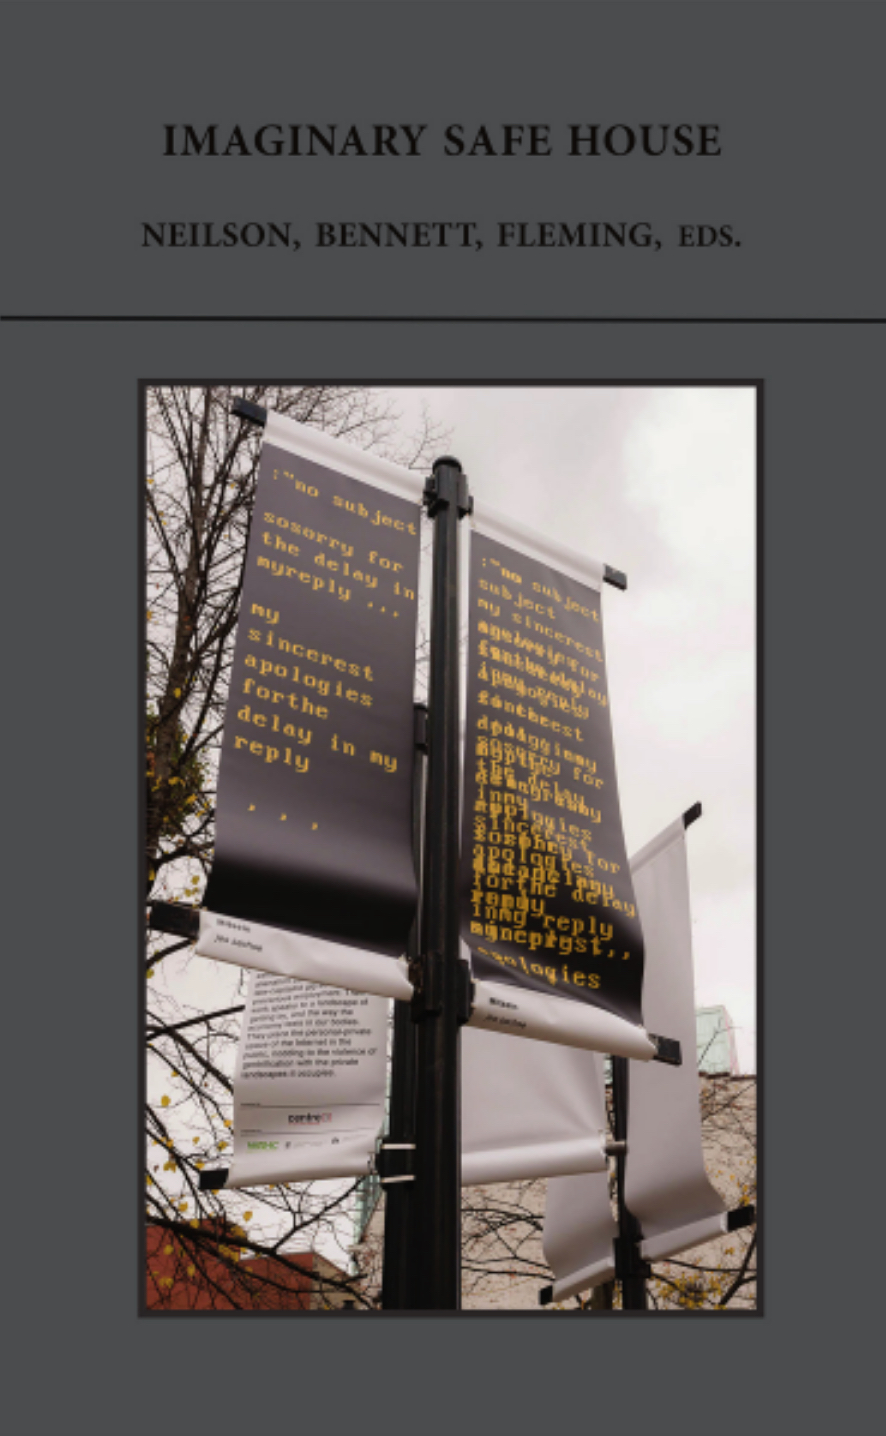 The cover of Imaginary Safe House; edited by Shane Neilson, Roxanna Bennett, Ali Fleming. The cover is gray with black text. A photograph is displayed beneath the title, which shows street banners with poetry printed on them.